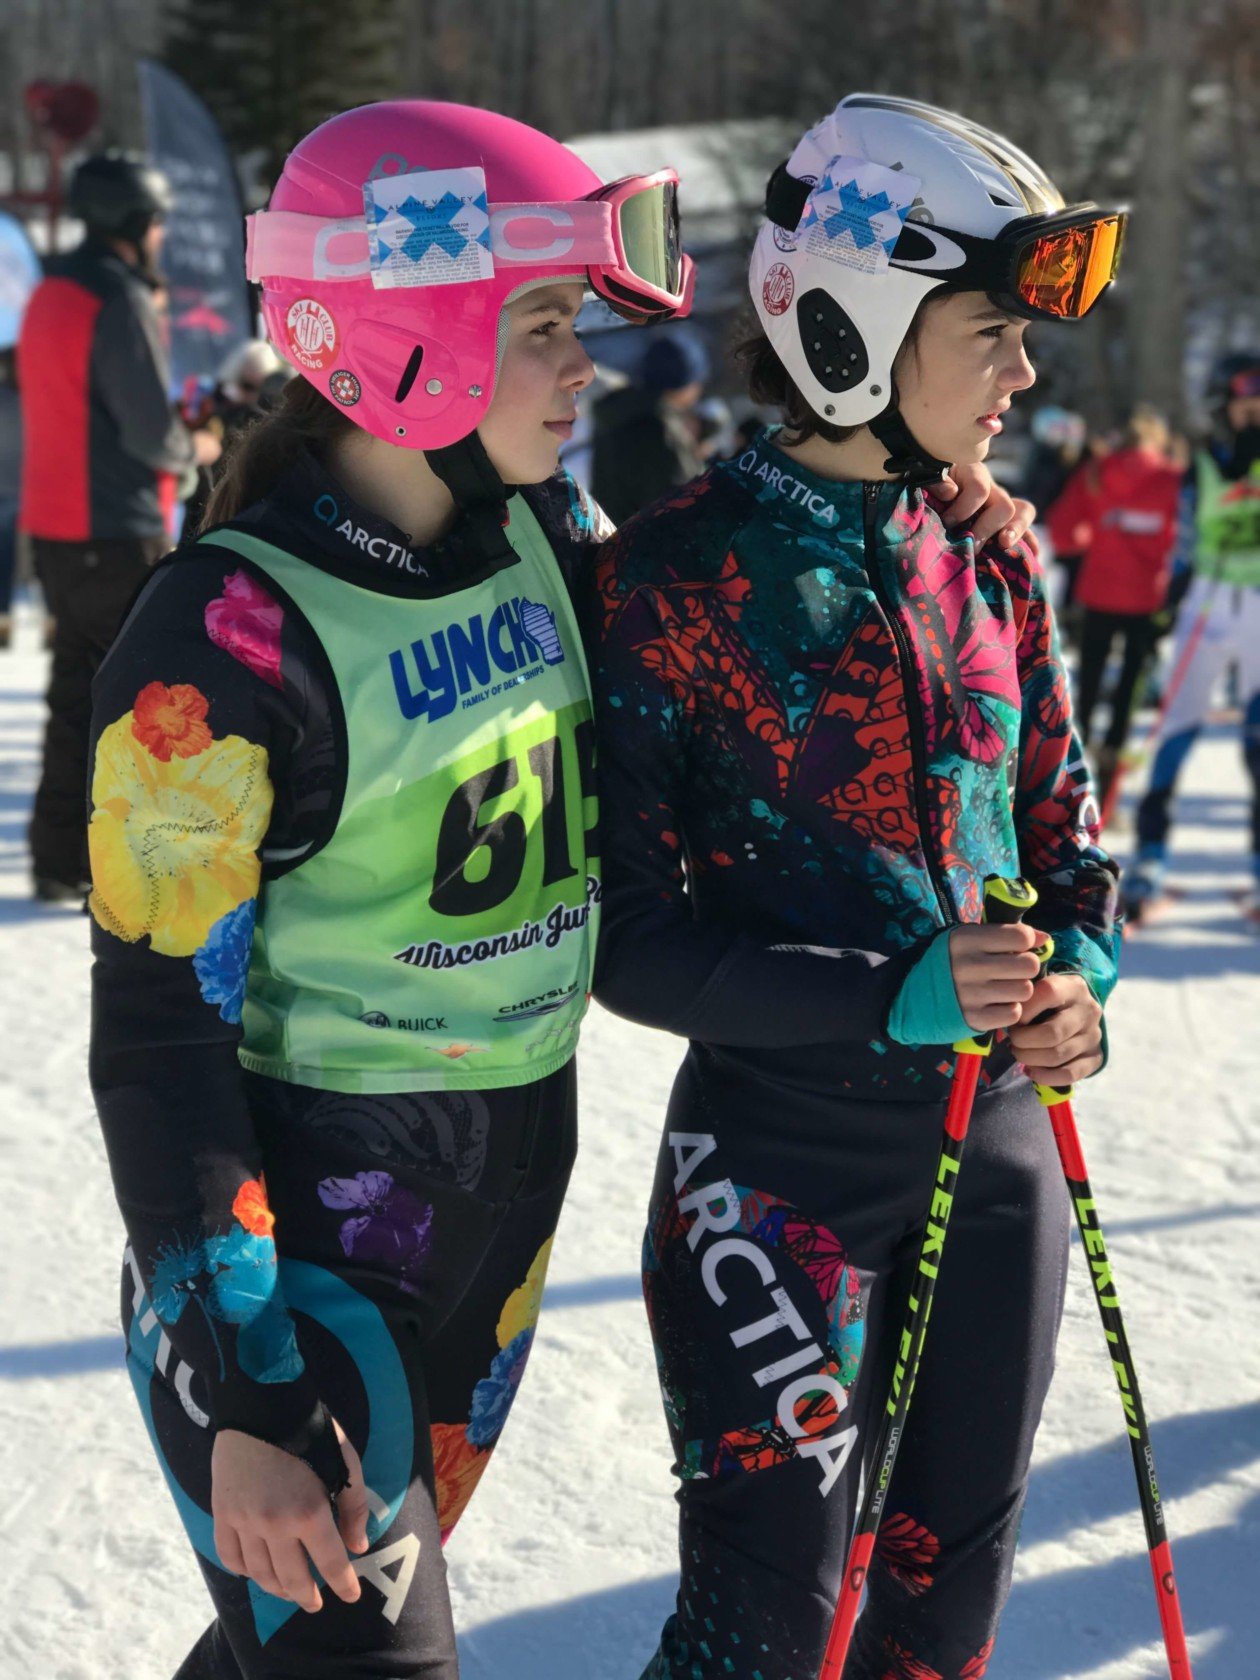 ski racing suits for girls from Arctica